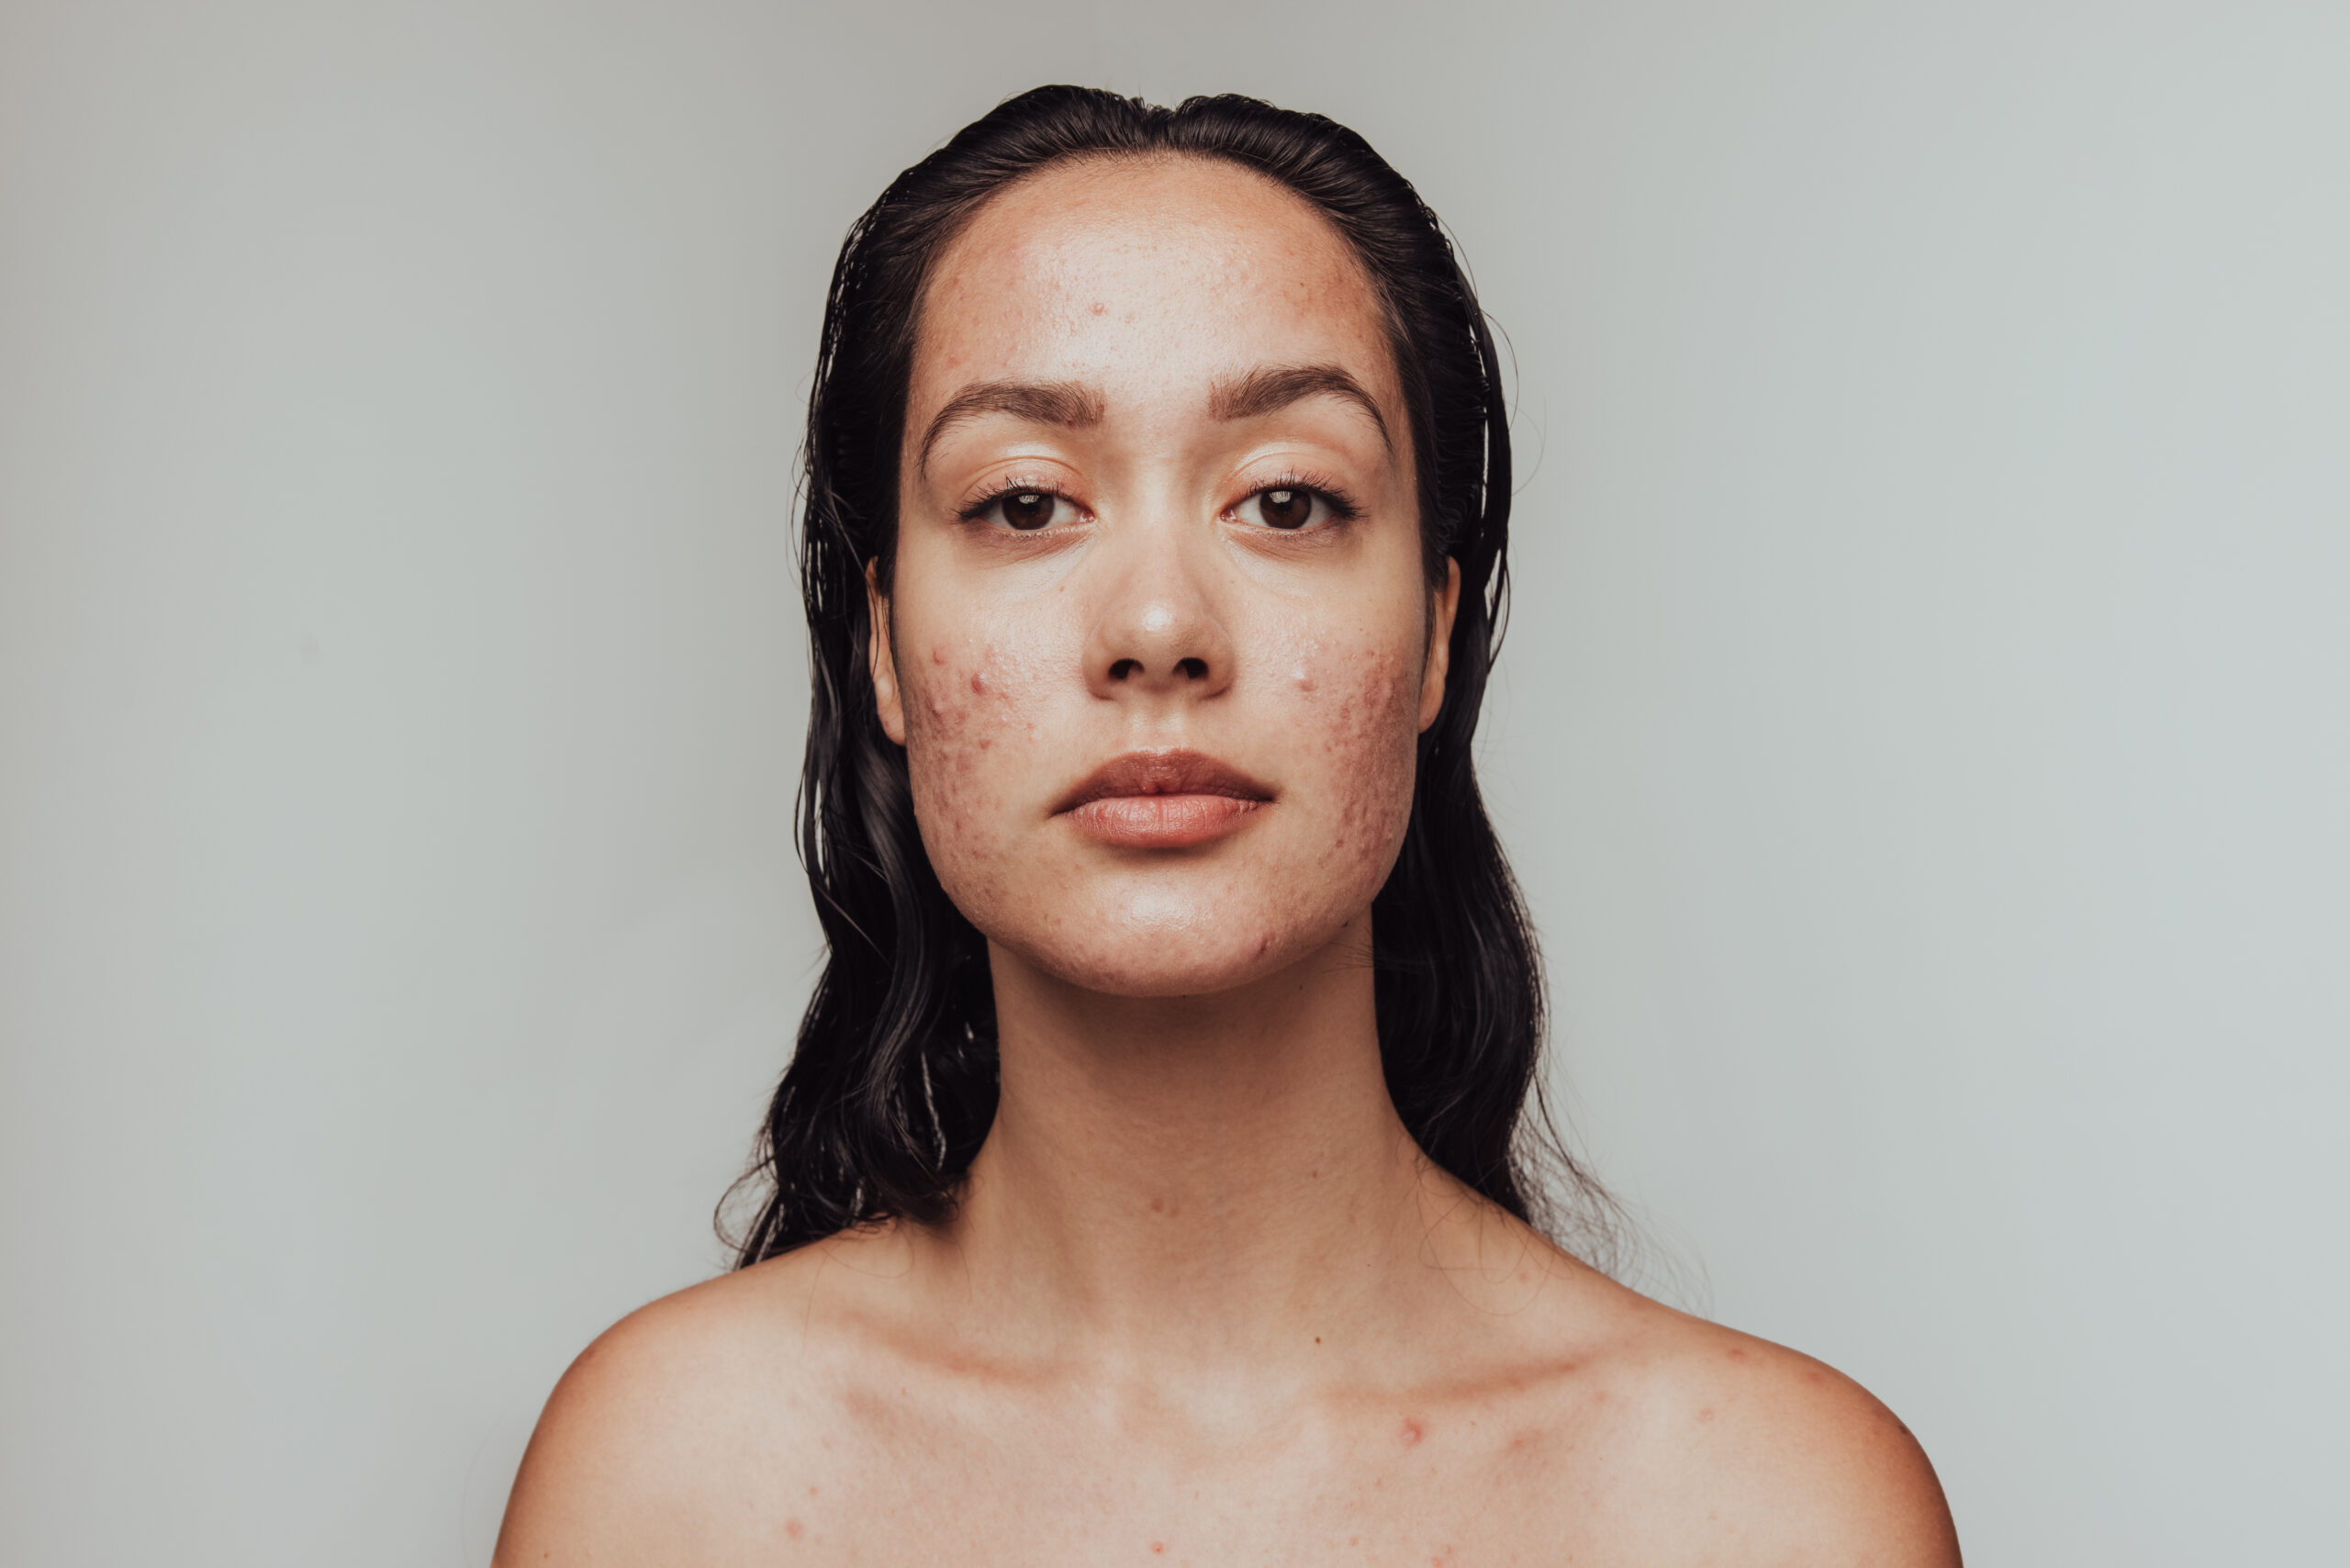 Confident model with severe acne faces forward.